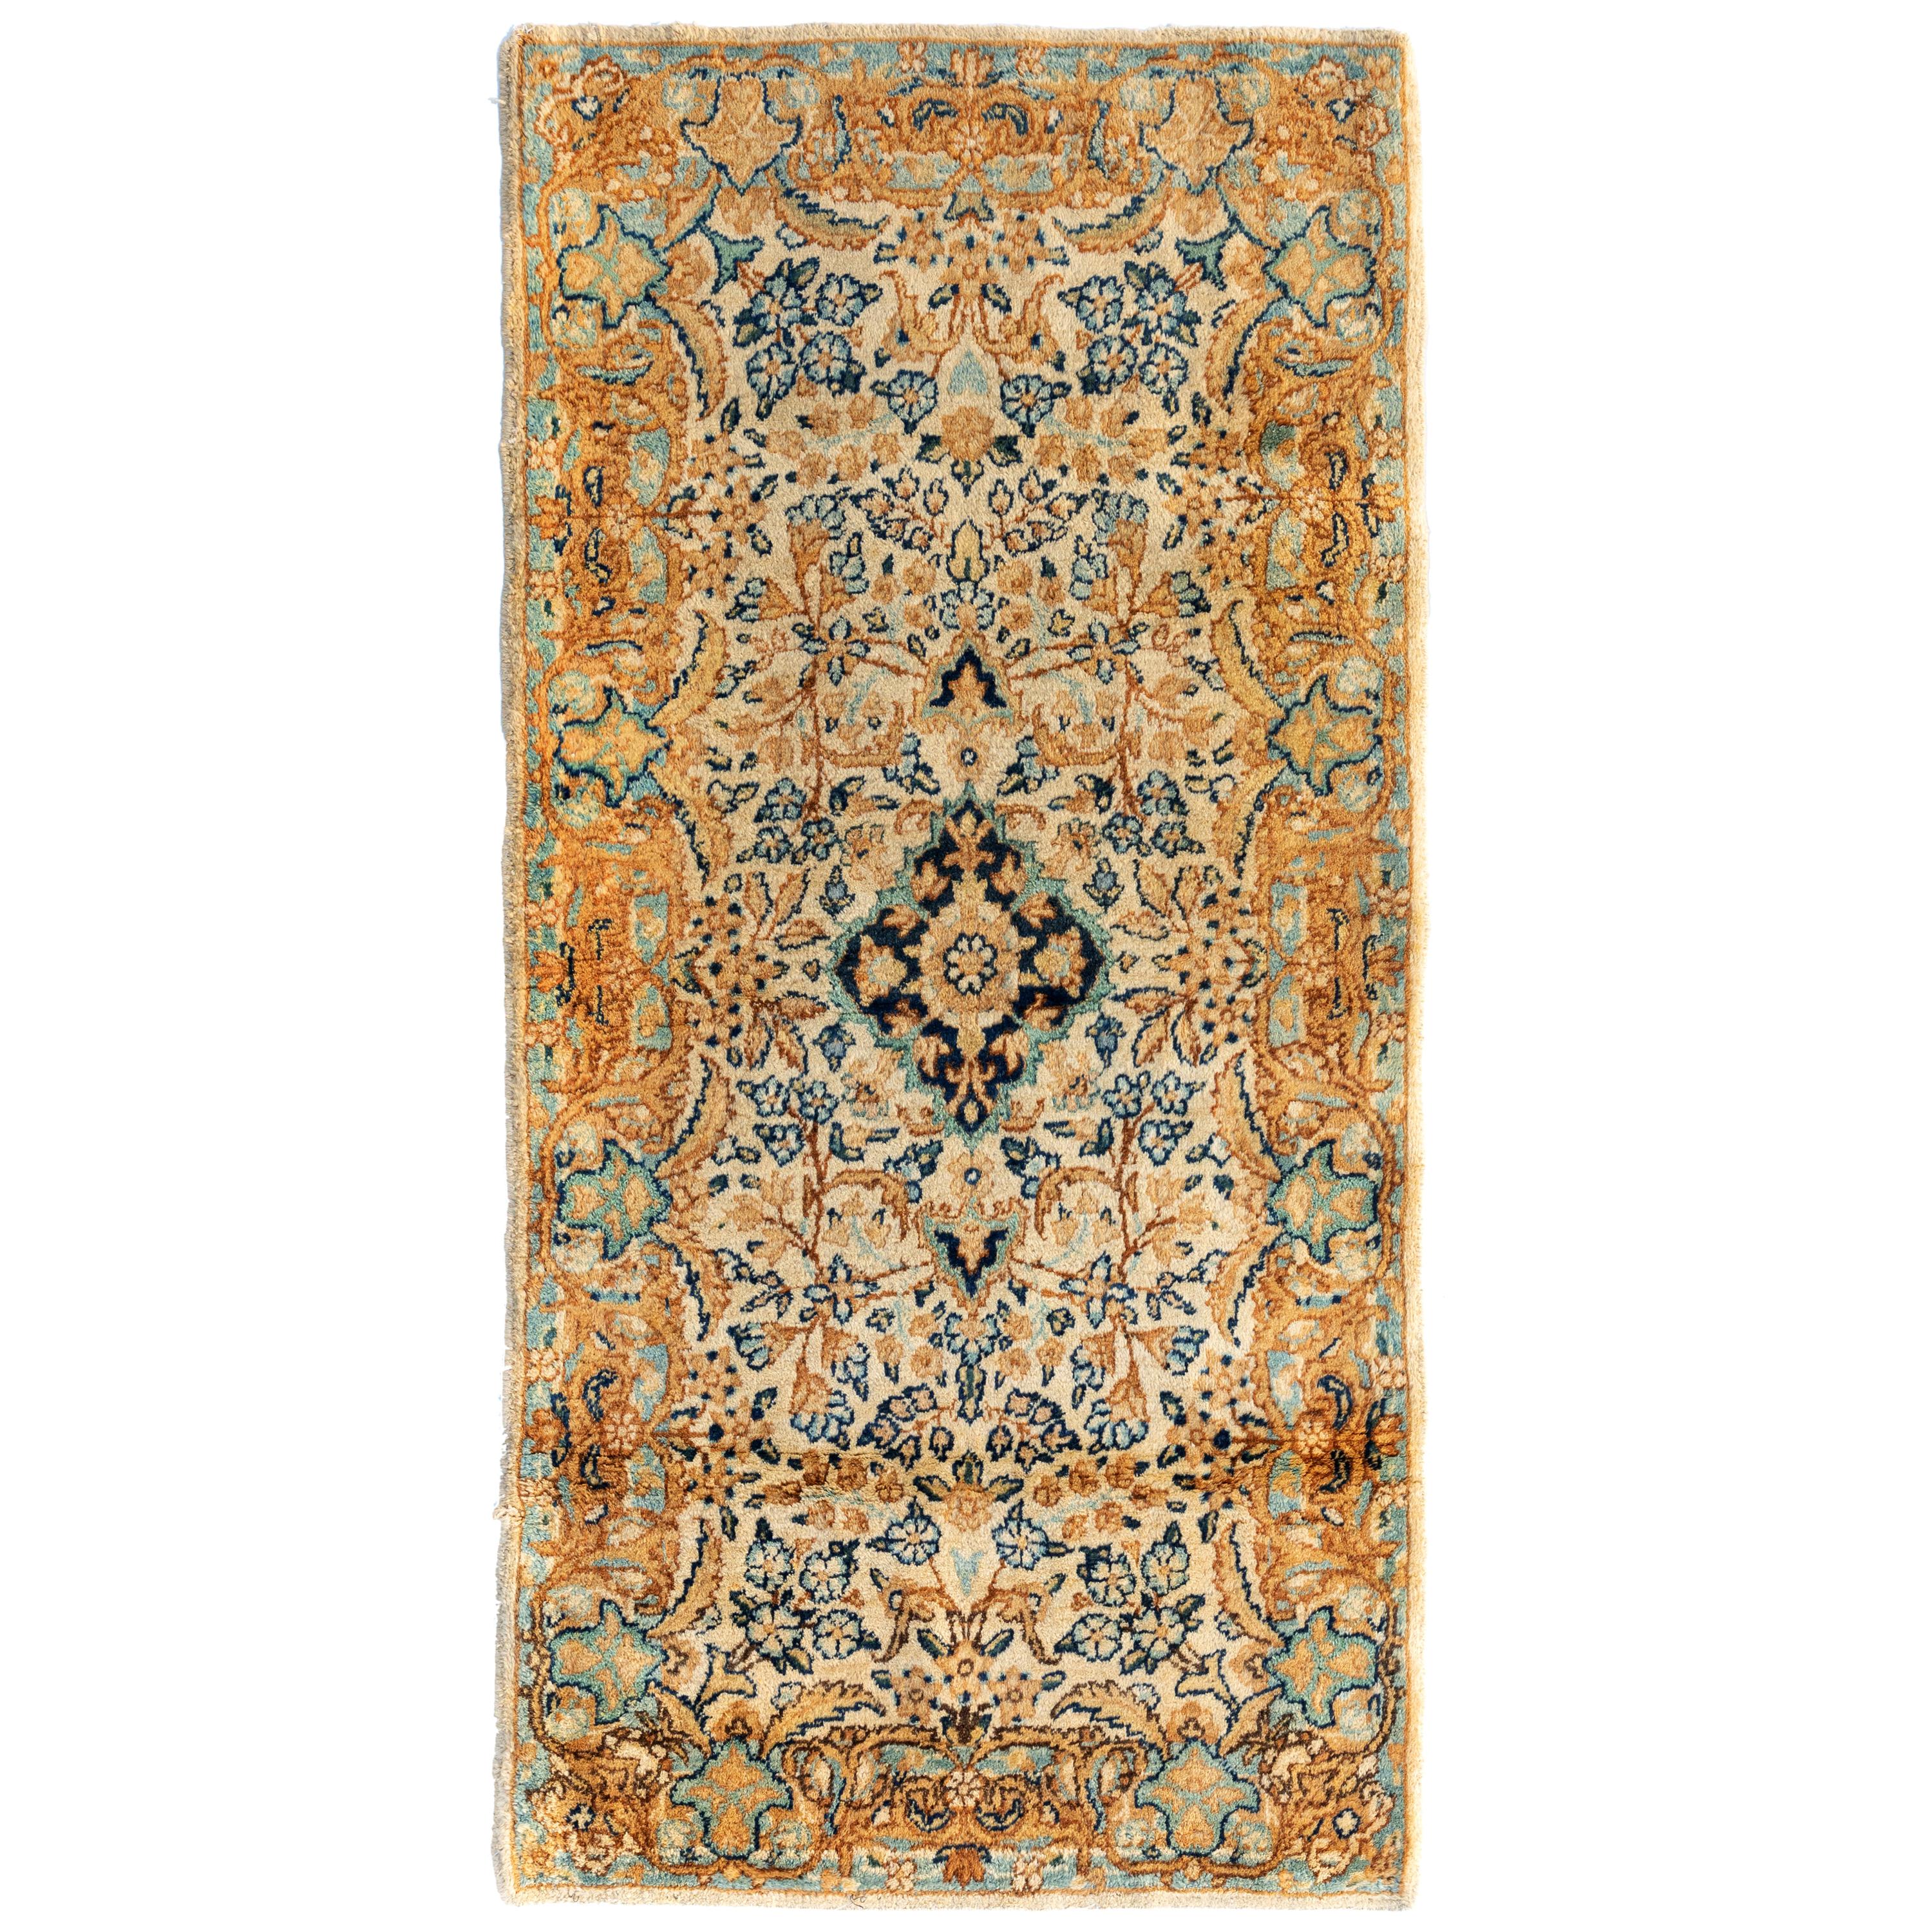 Antique Vintage Persian Ivory Gold Blue Floral Kirman Small Rug, circa 1930s